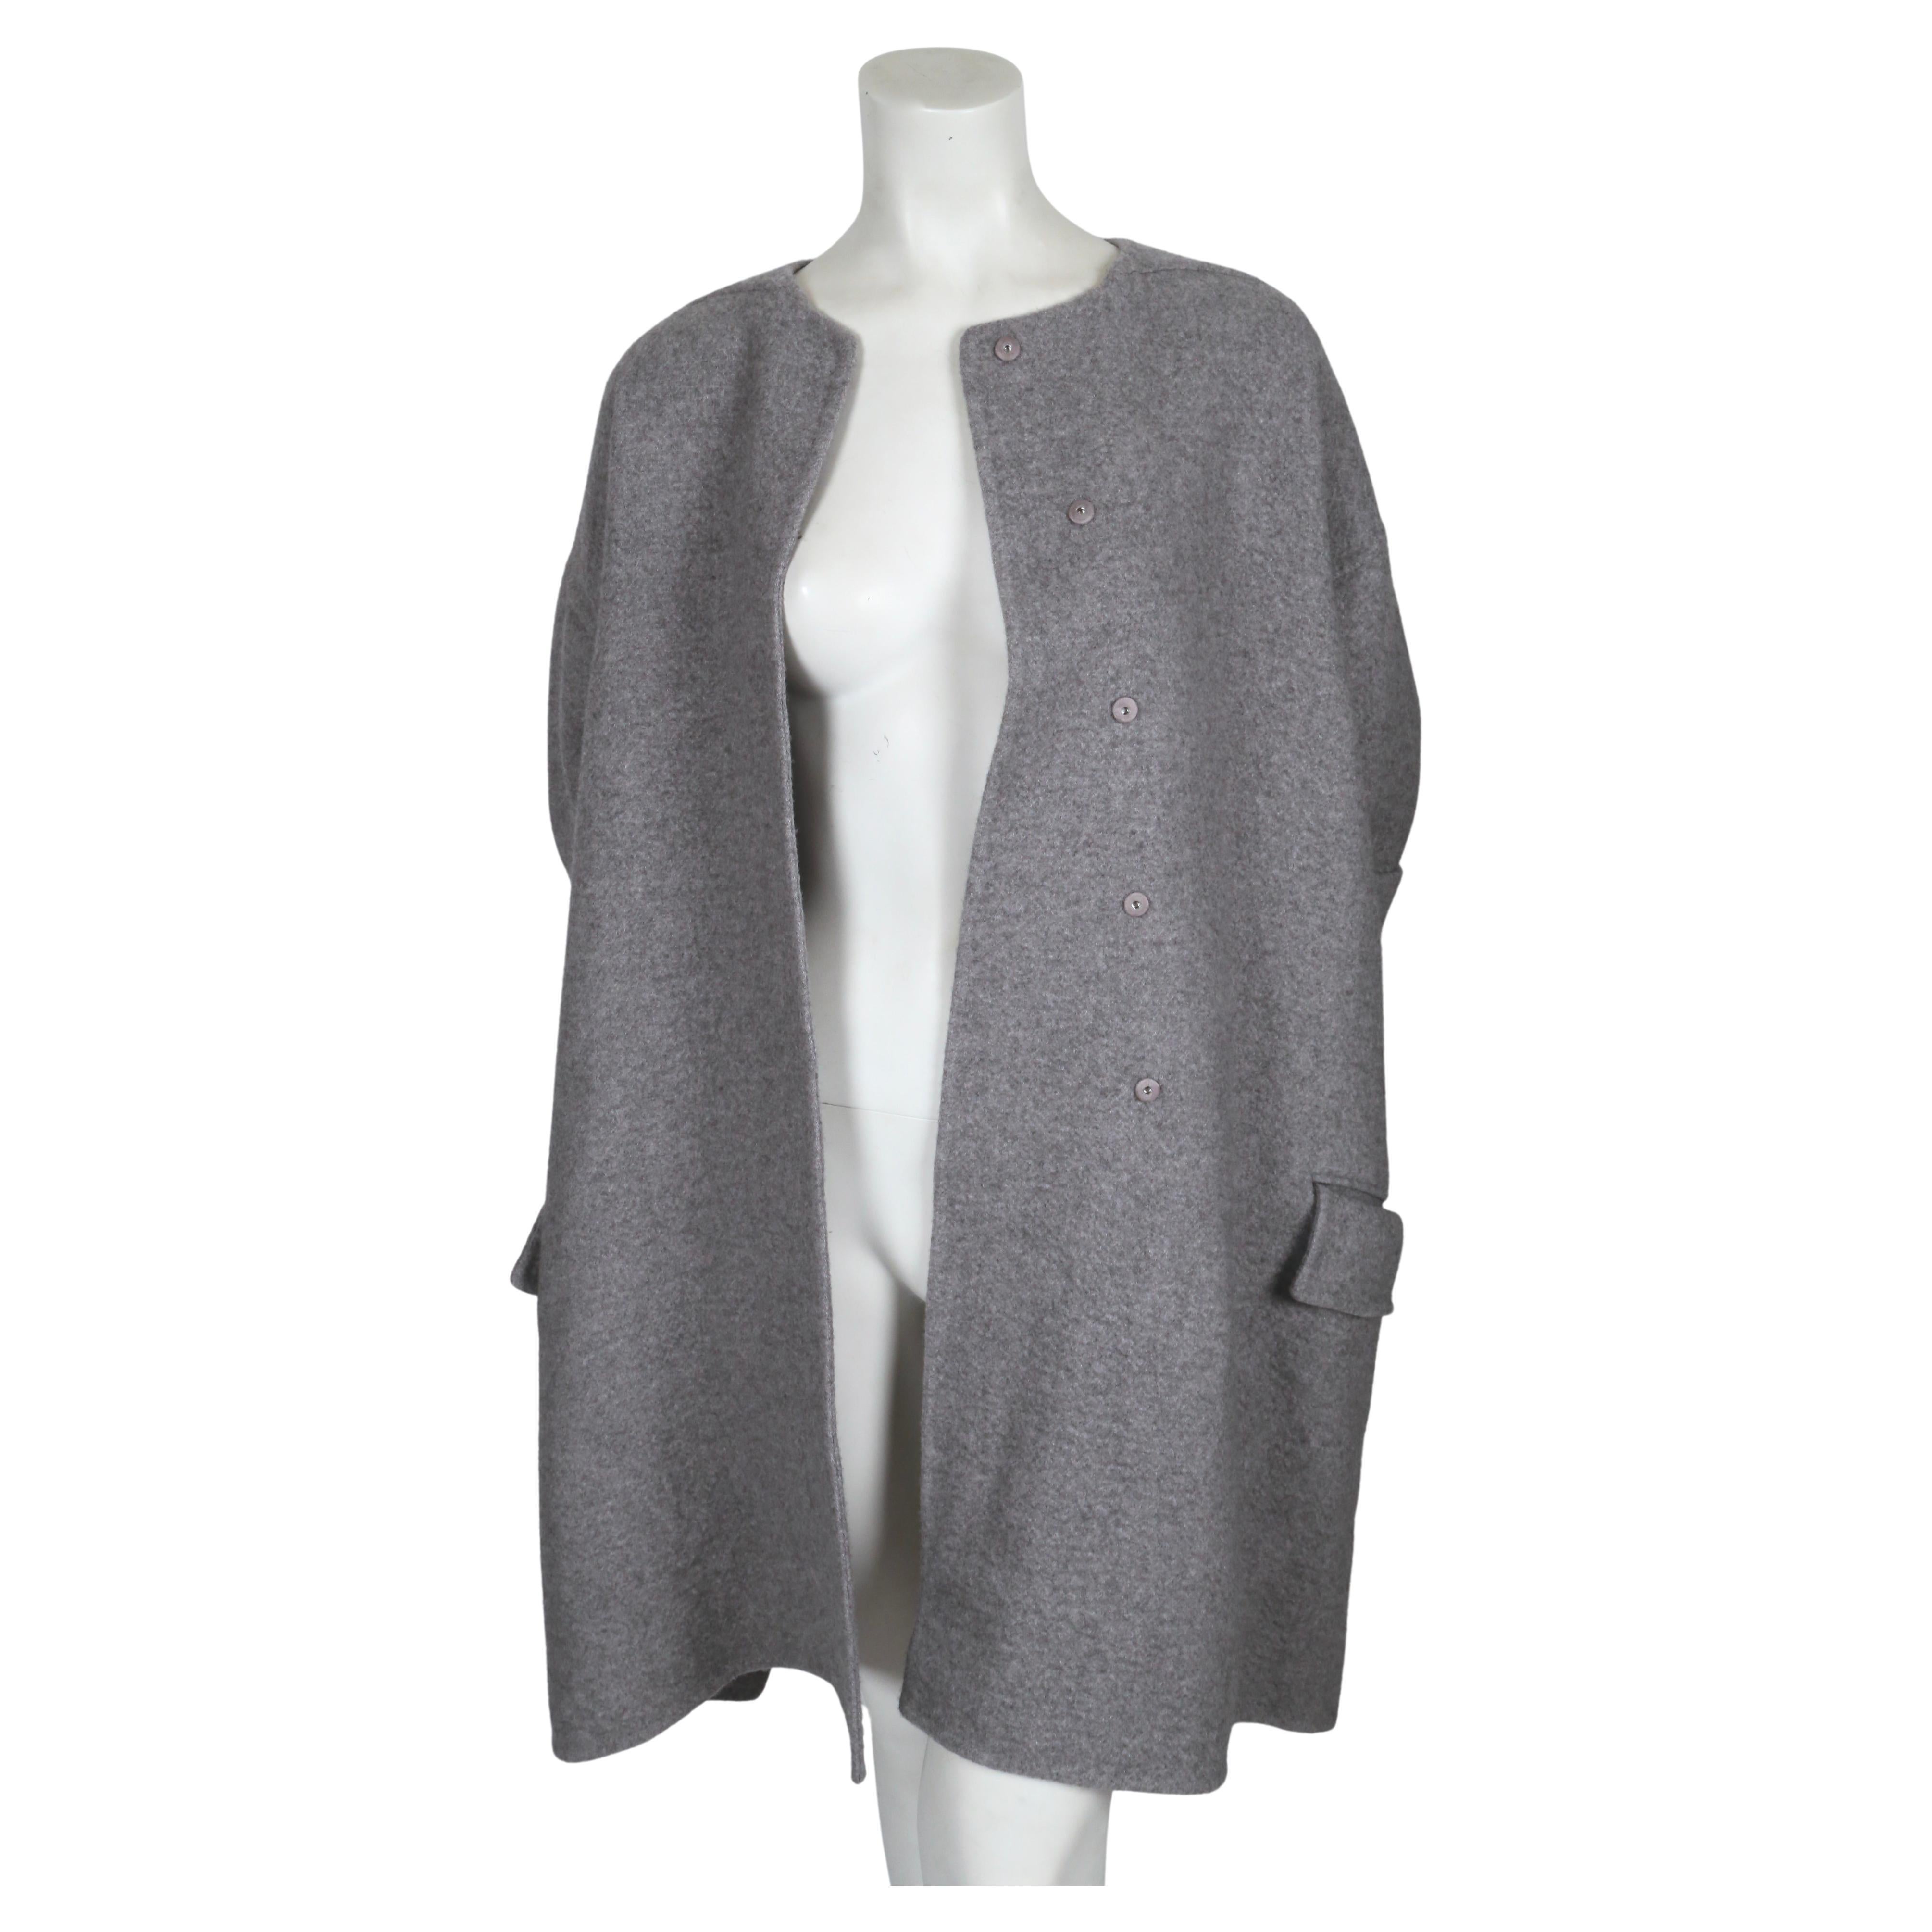 Women's or Men's 2013 CELINE by PHOEBE PHILO grey cashmere runway coat with exaggerated sleeves For Sale